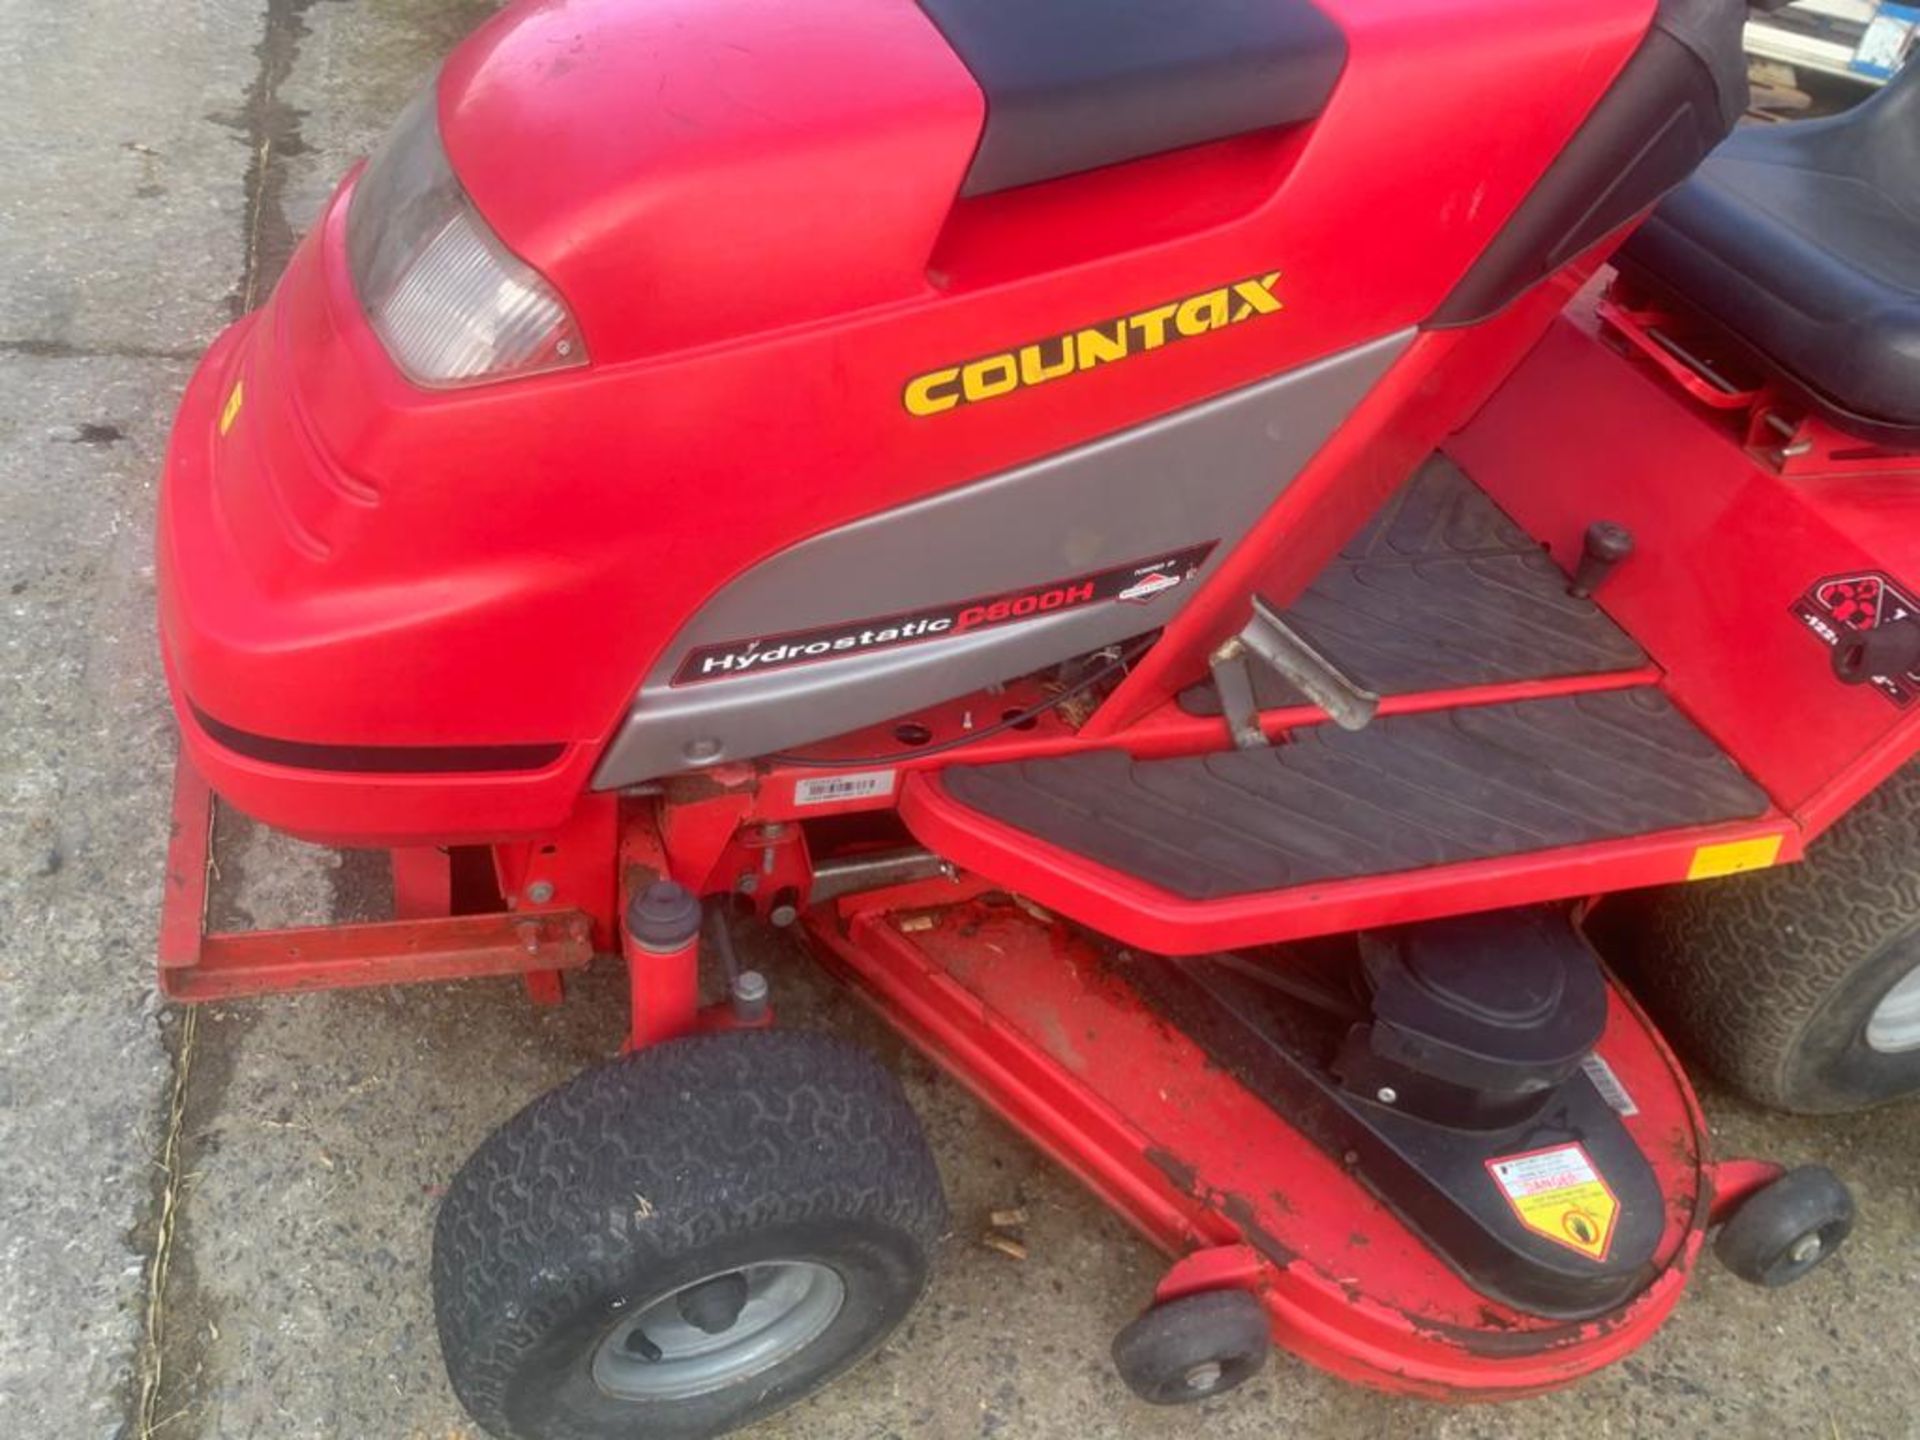 COUNTAX C800 HYDROSTATIC RIDE ON LAWN MOWER *PLUS VAT* - Image 6 of 8